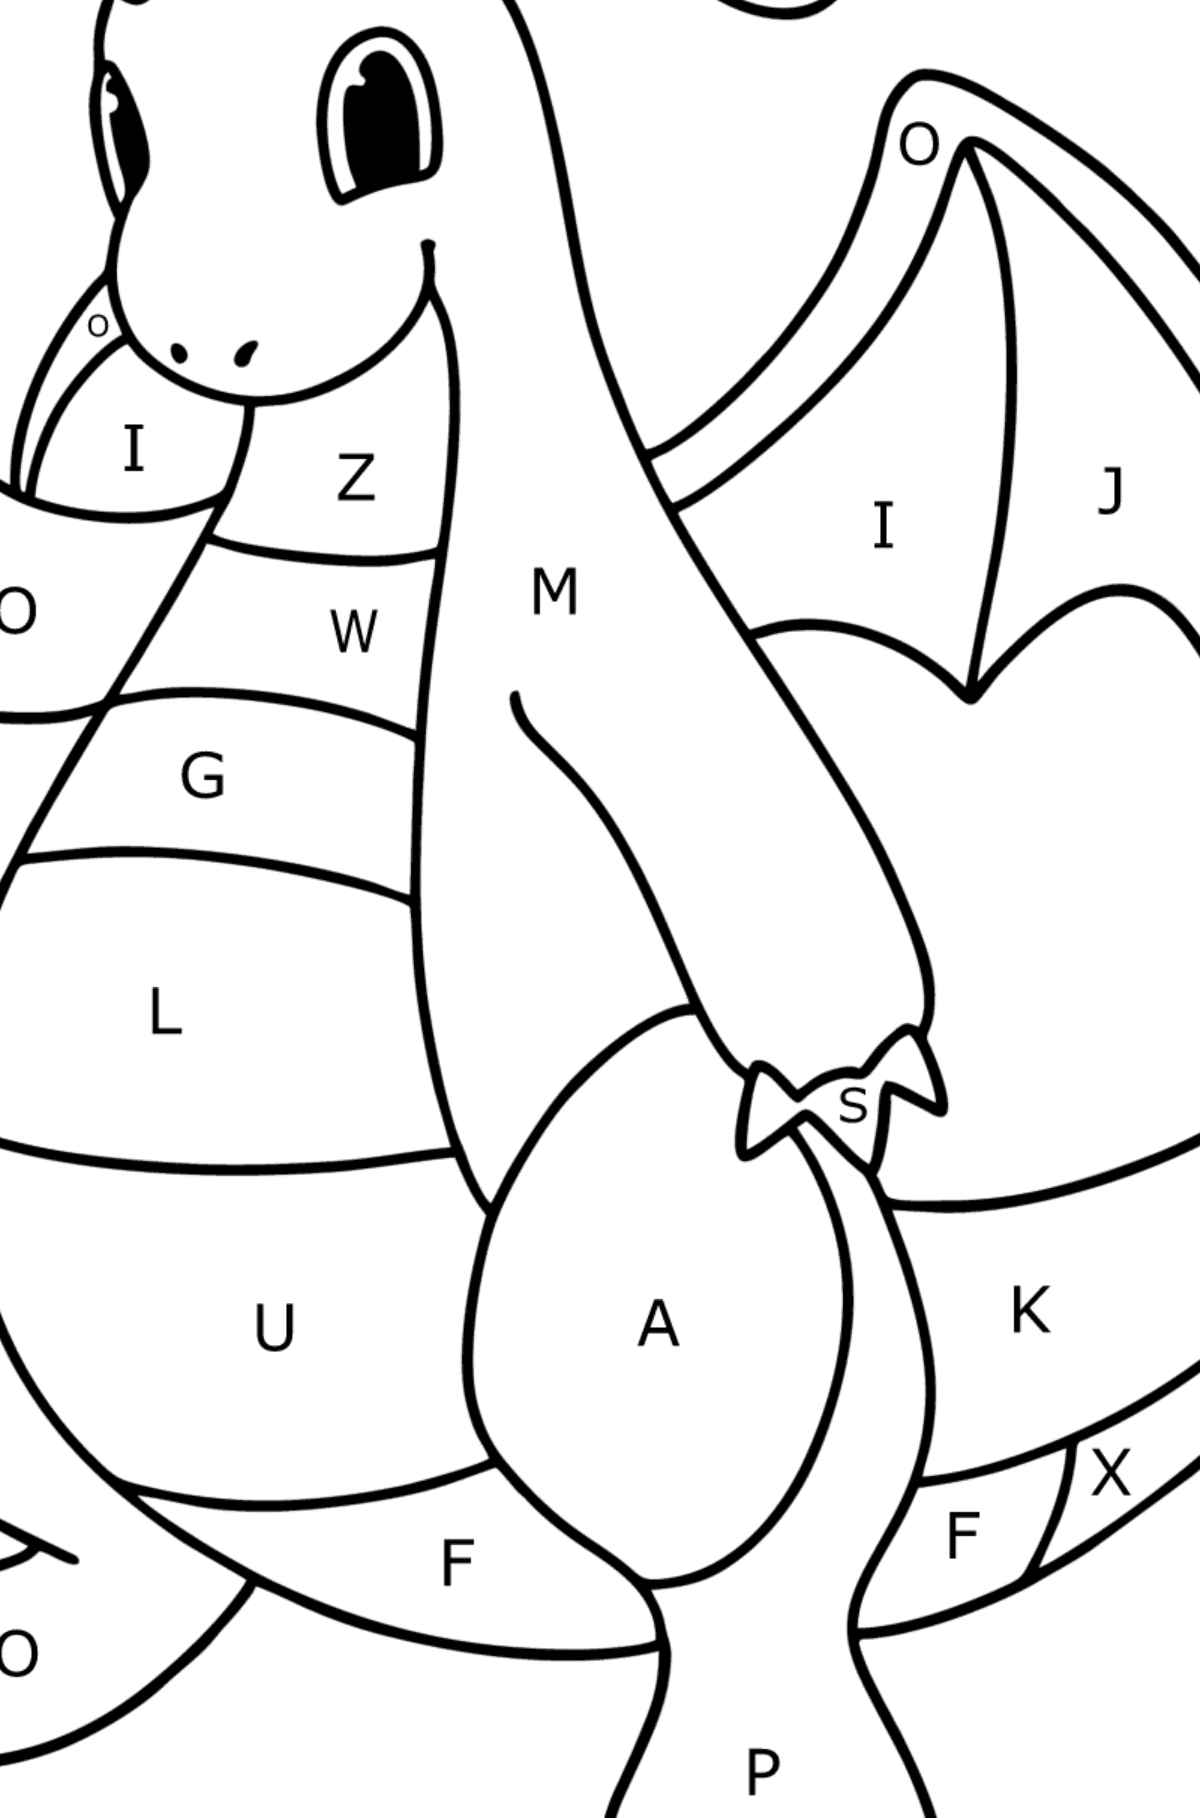 Pokemon Go Dragonite coloring page - Coloring by Letters for Kids